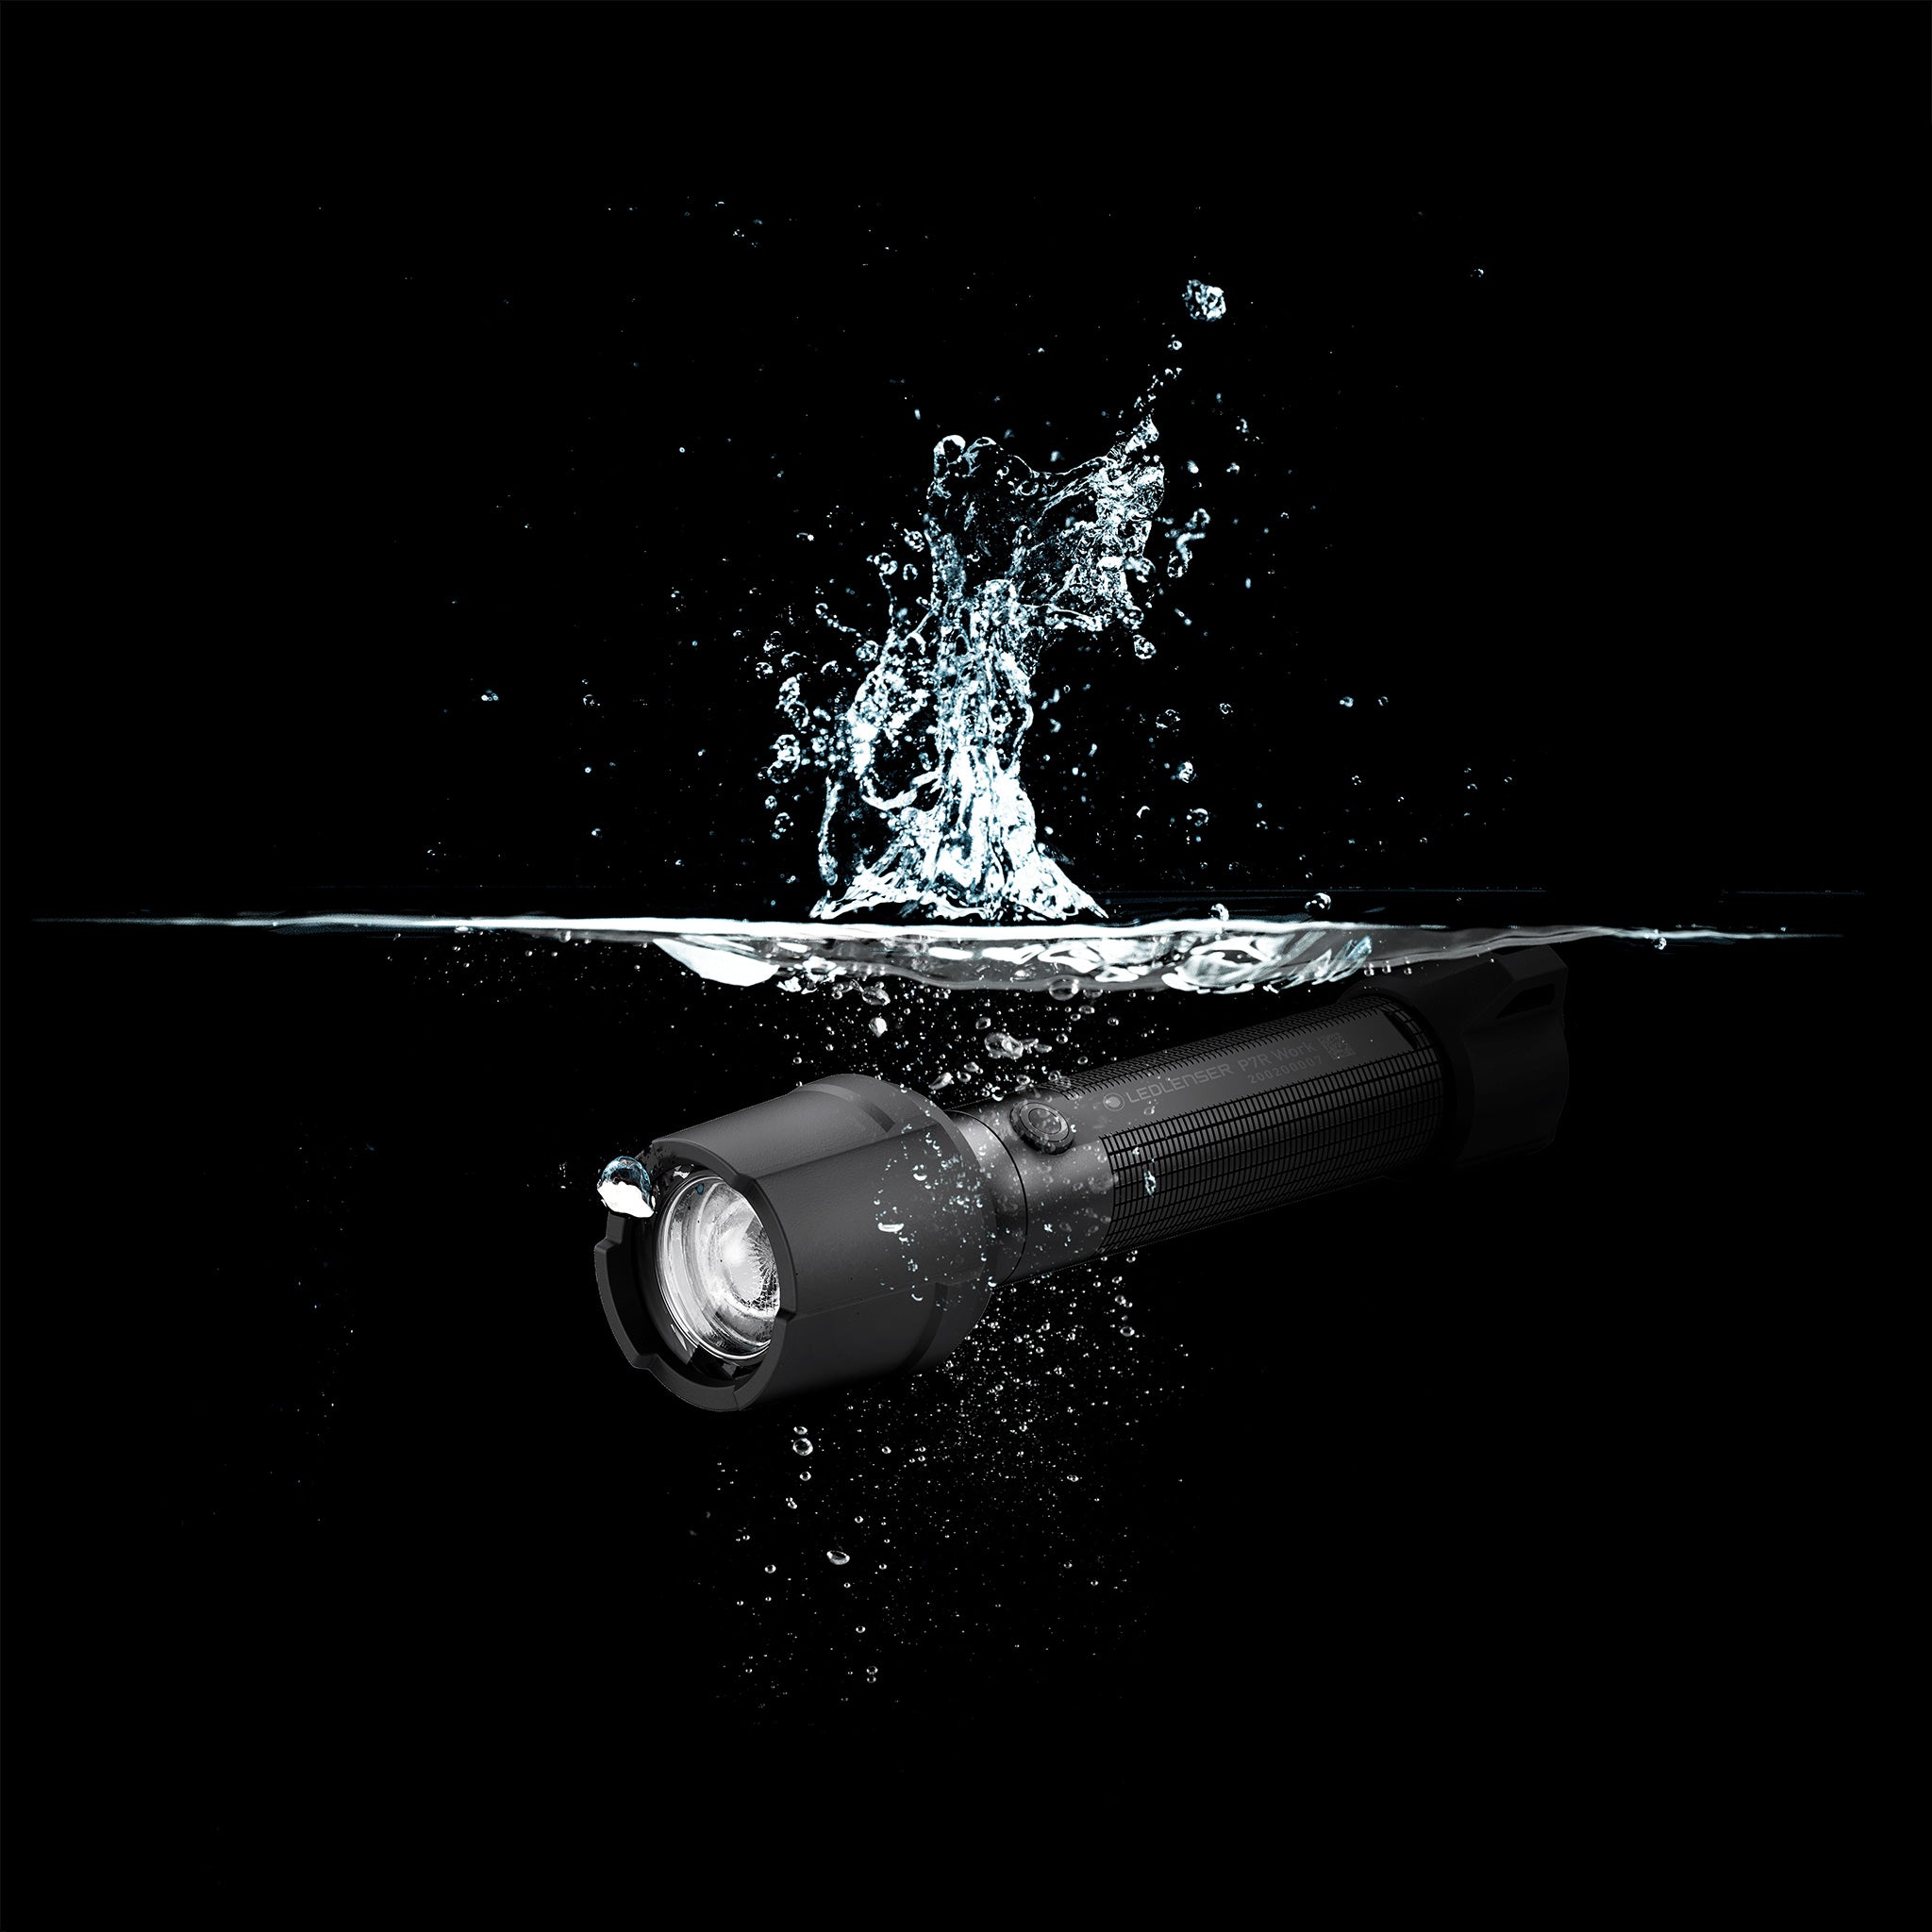 P7R Work Rechargeable Torch